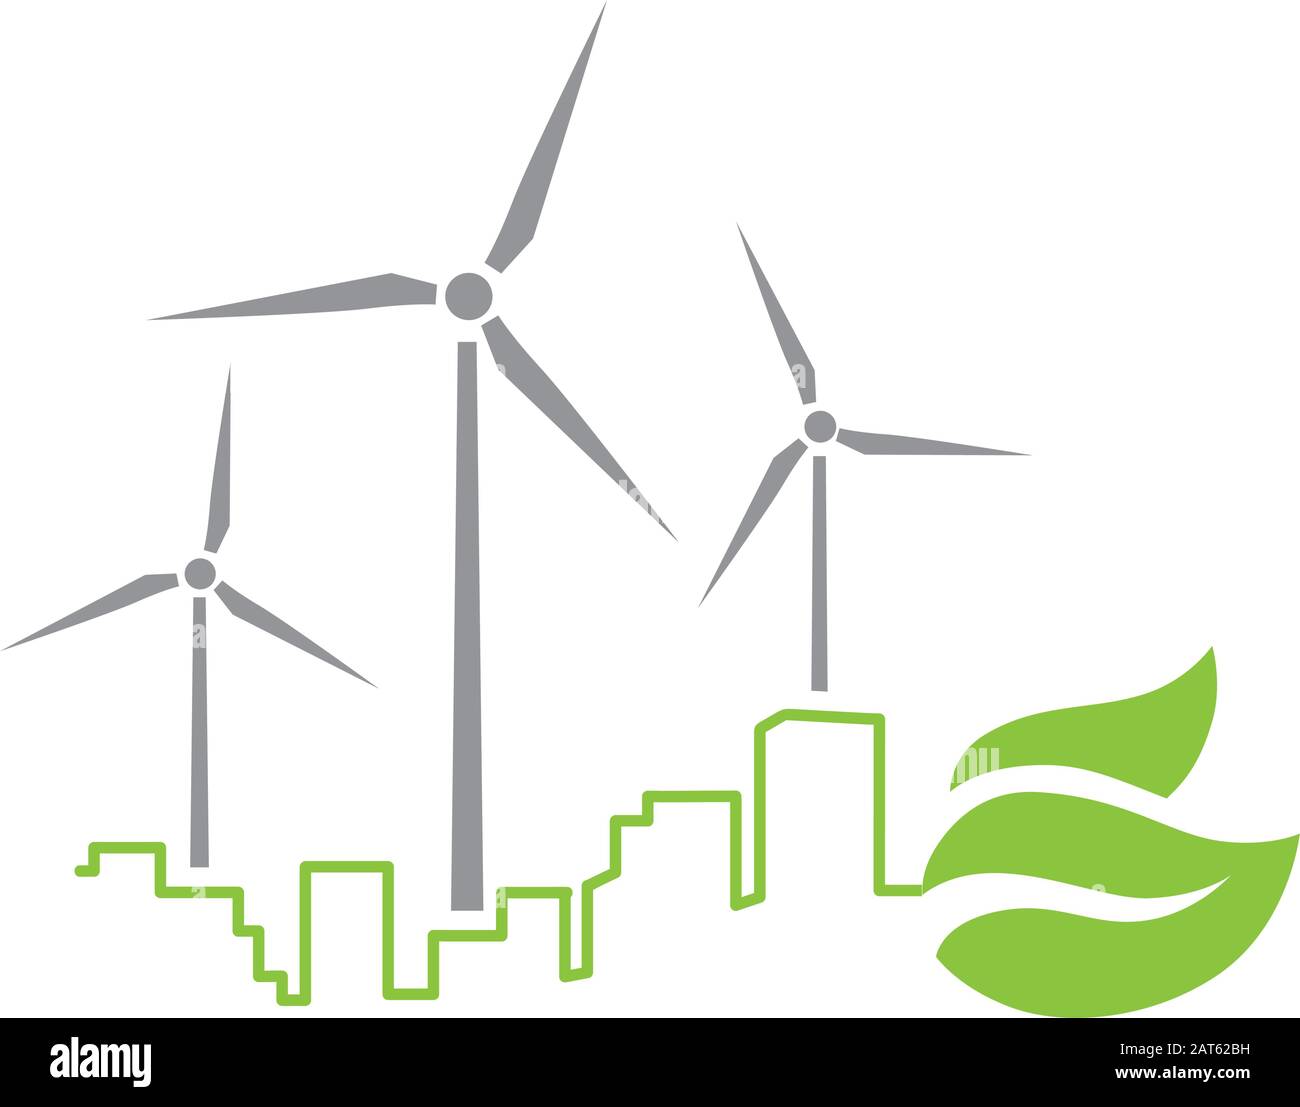 leaves, city and wind turbine, vector graphic design element Stock Vector